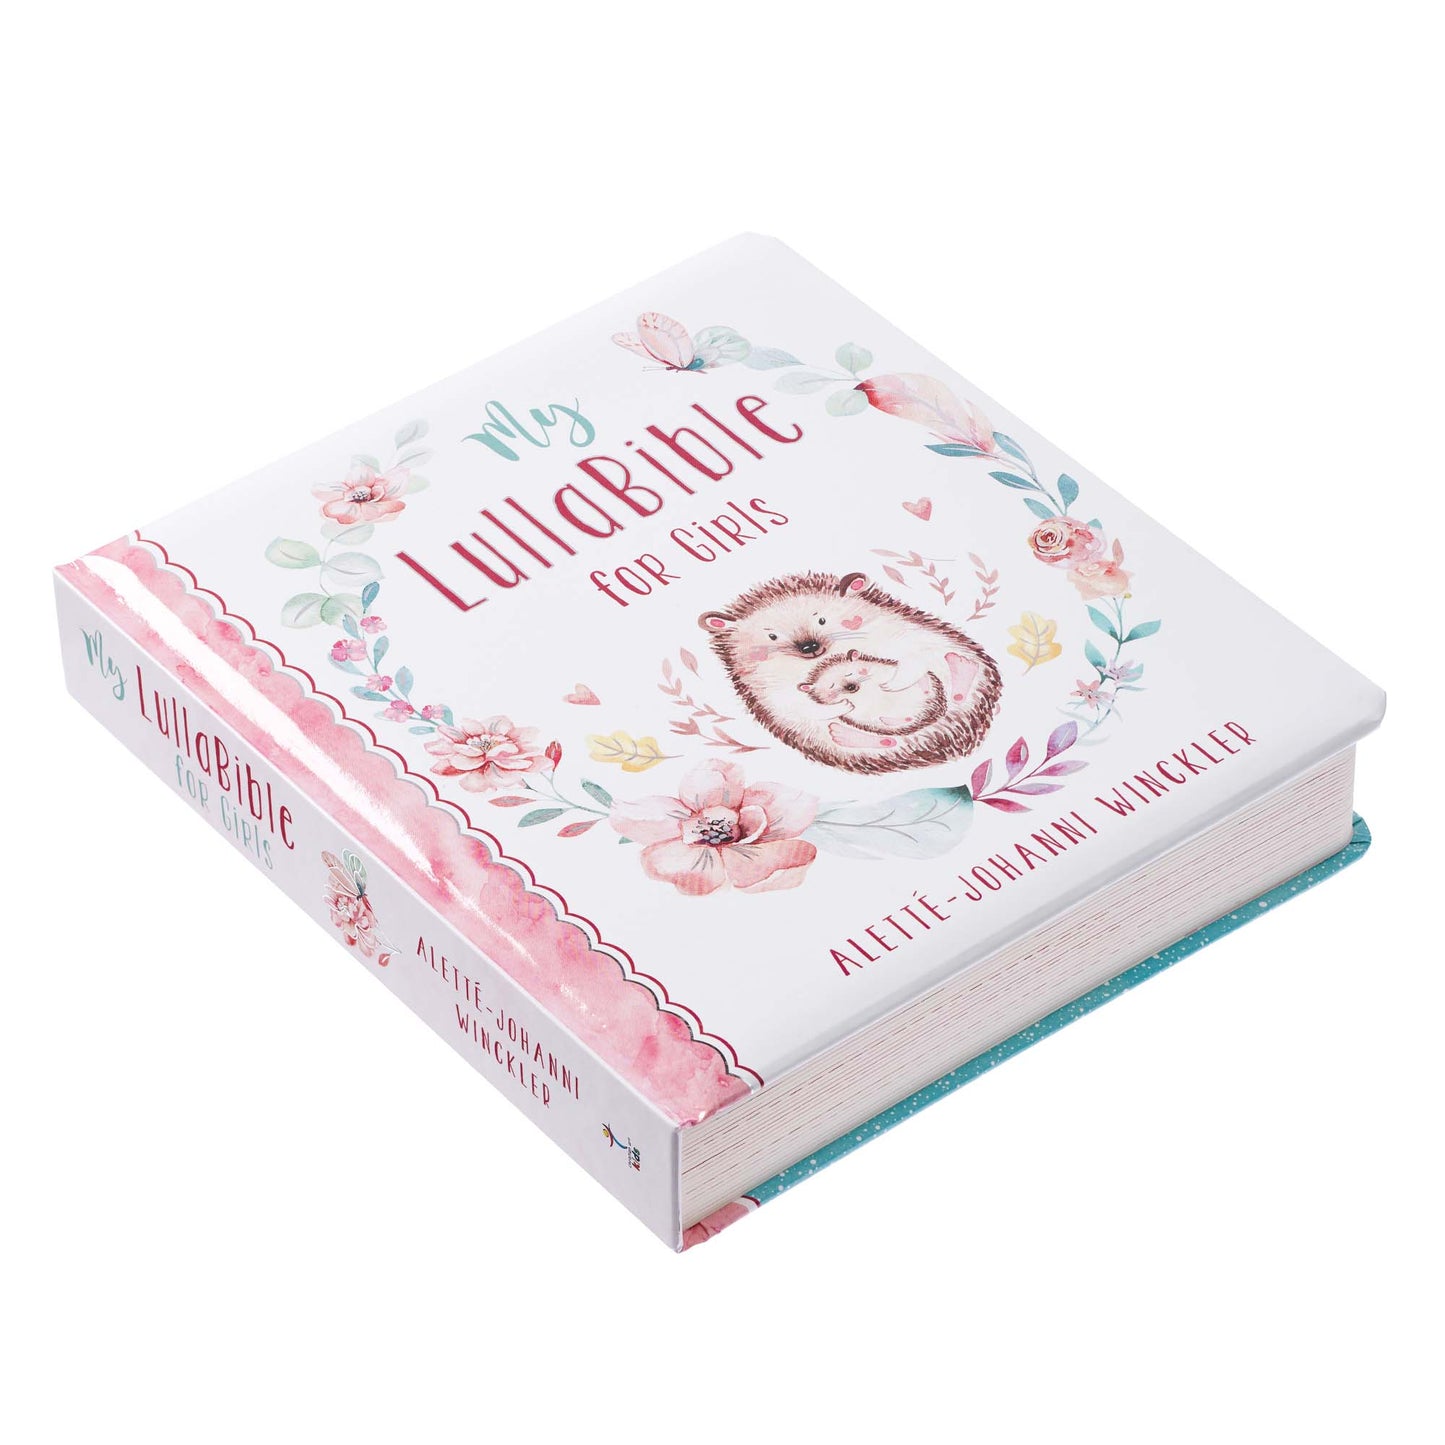 My LullaBible for Girls Bible Storybook - The Christian Gift Company